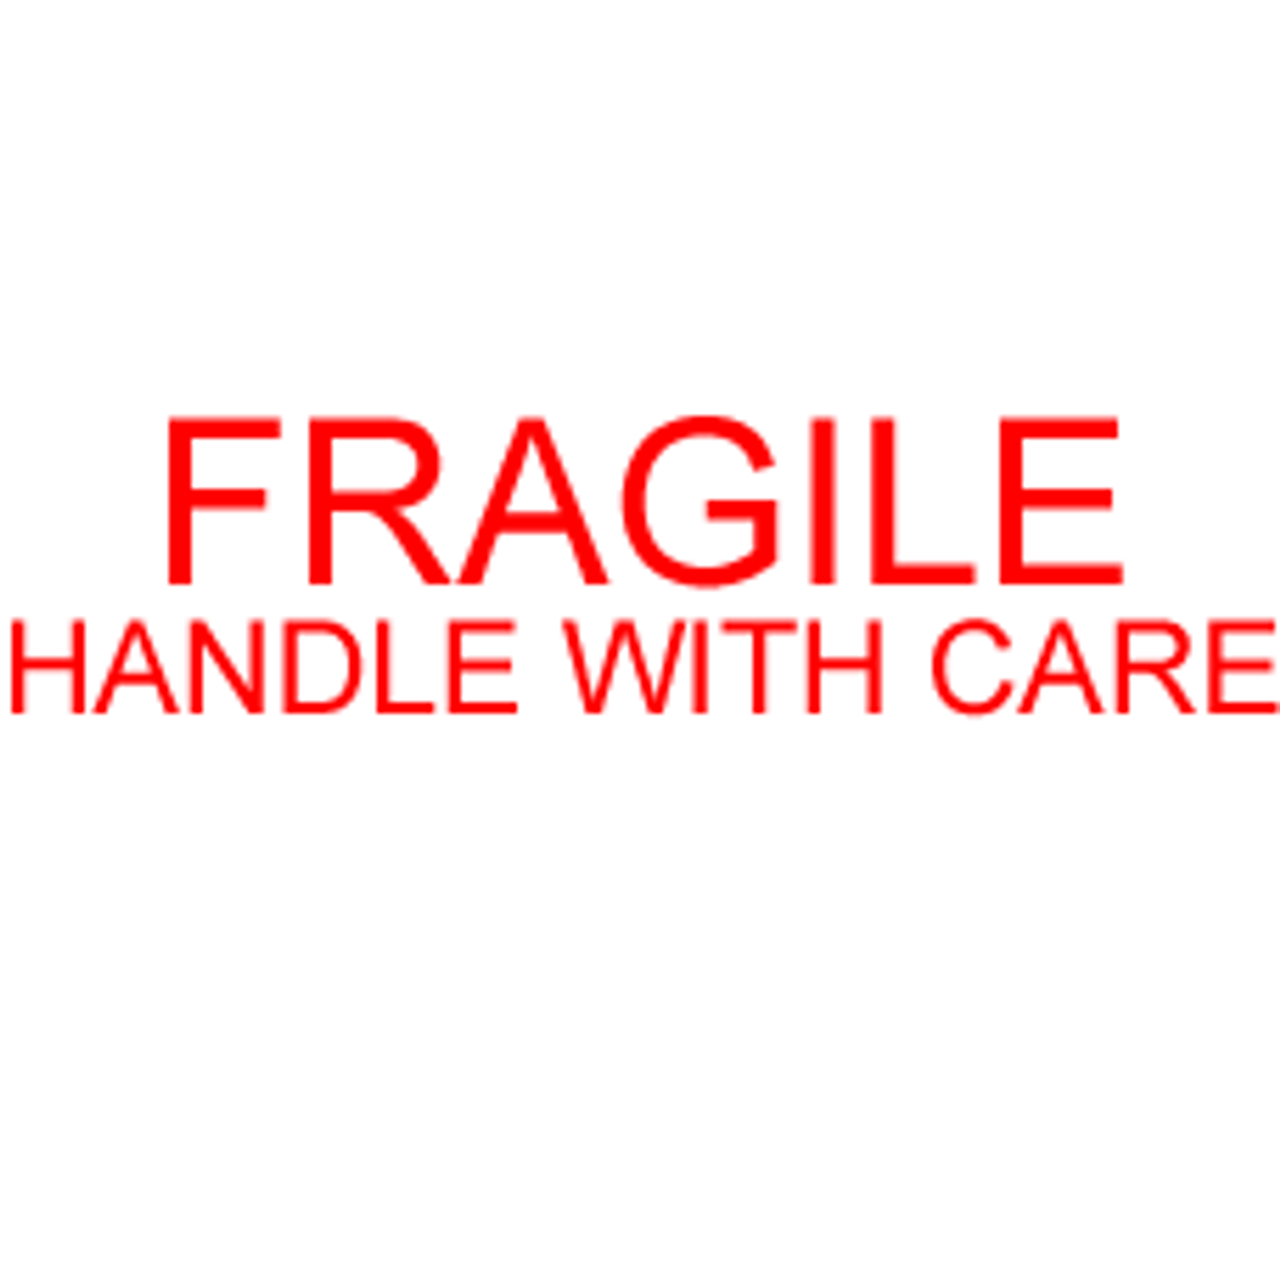 FRAGILE HANDLE WITH CARE Rubber Stamp for mail use self-inking